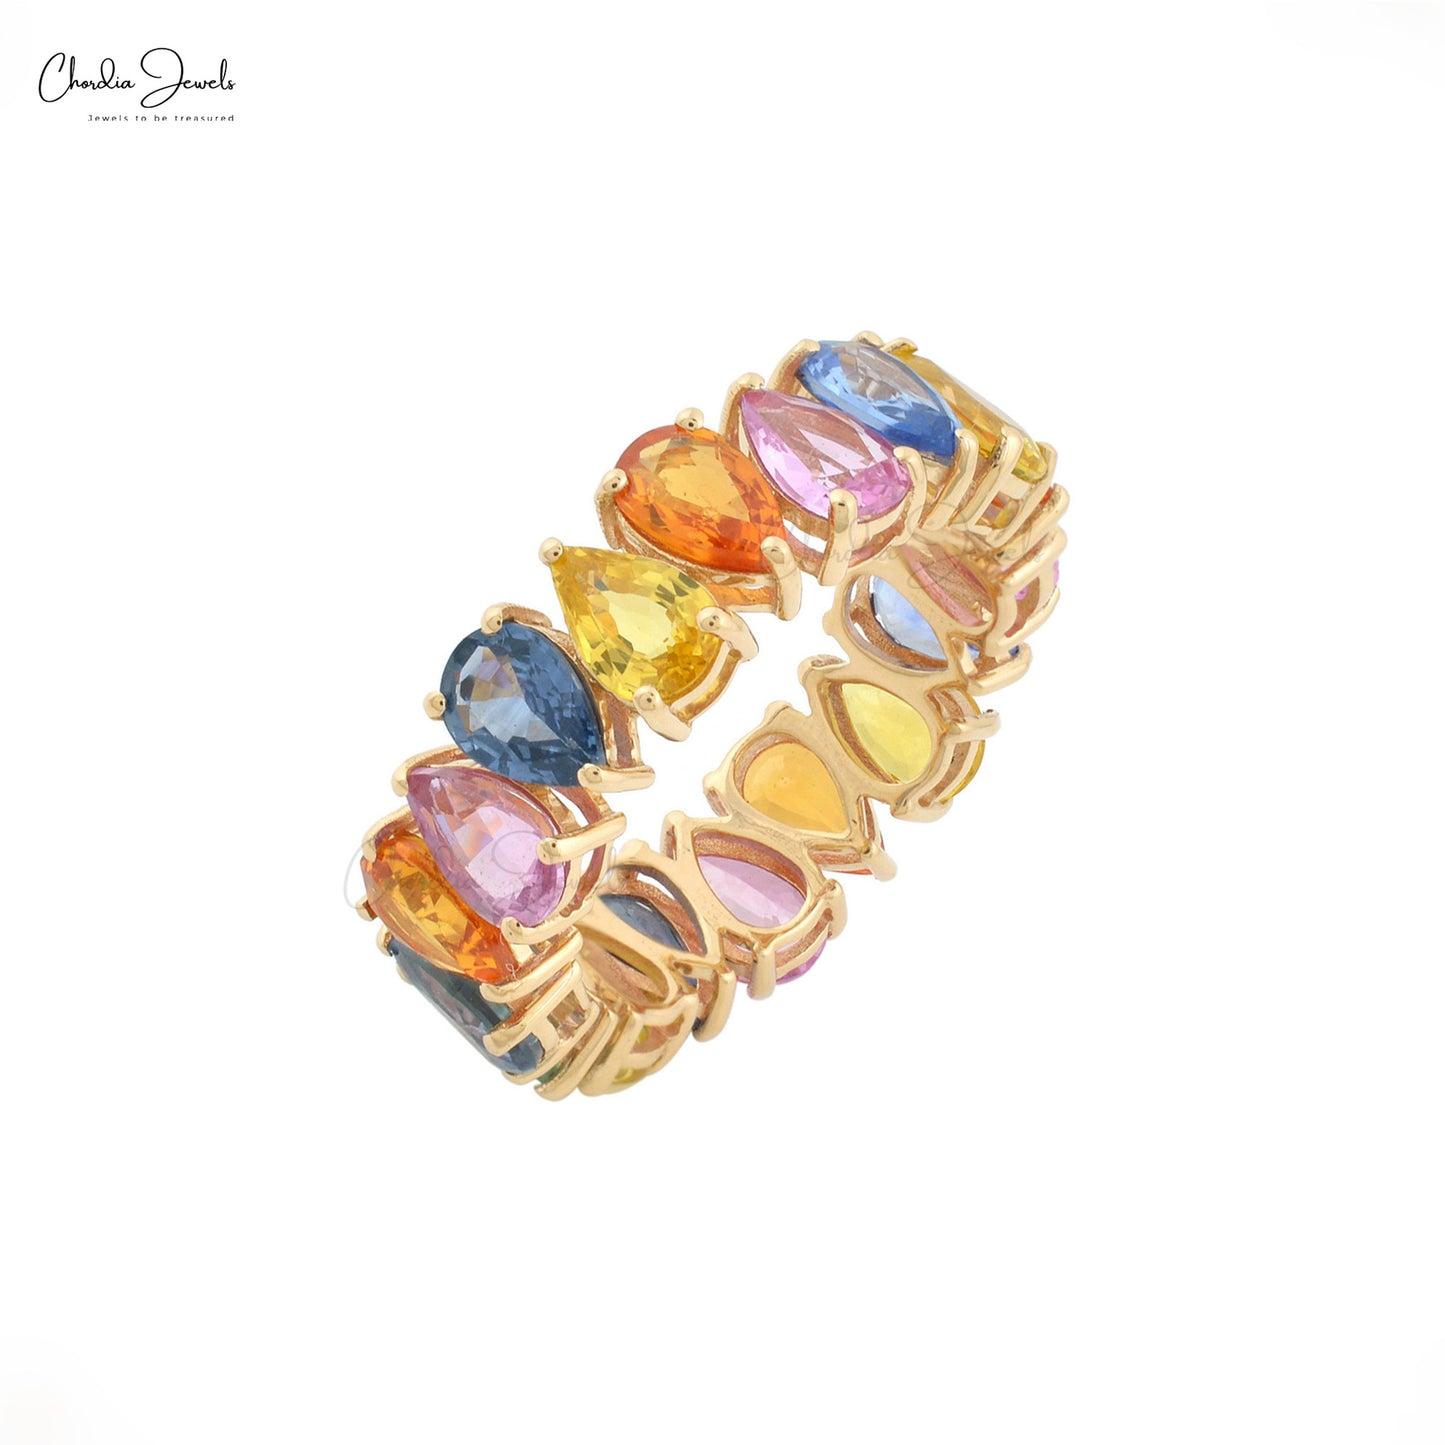 Multi Sapphire 6x4mm Pear Cut Gemstone Eternity Band For Her September Birthstone Jewelry in 14k Solid Yellow Gold